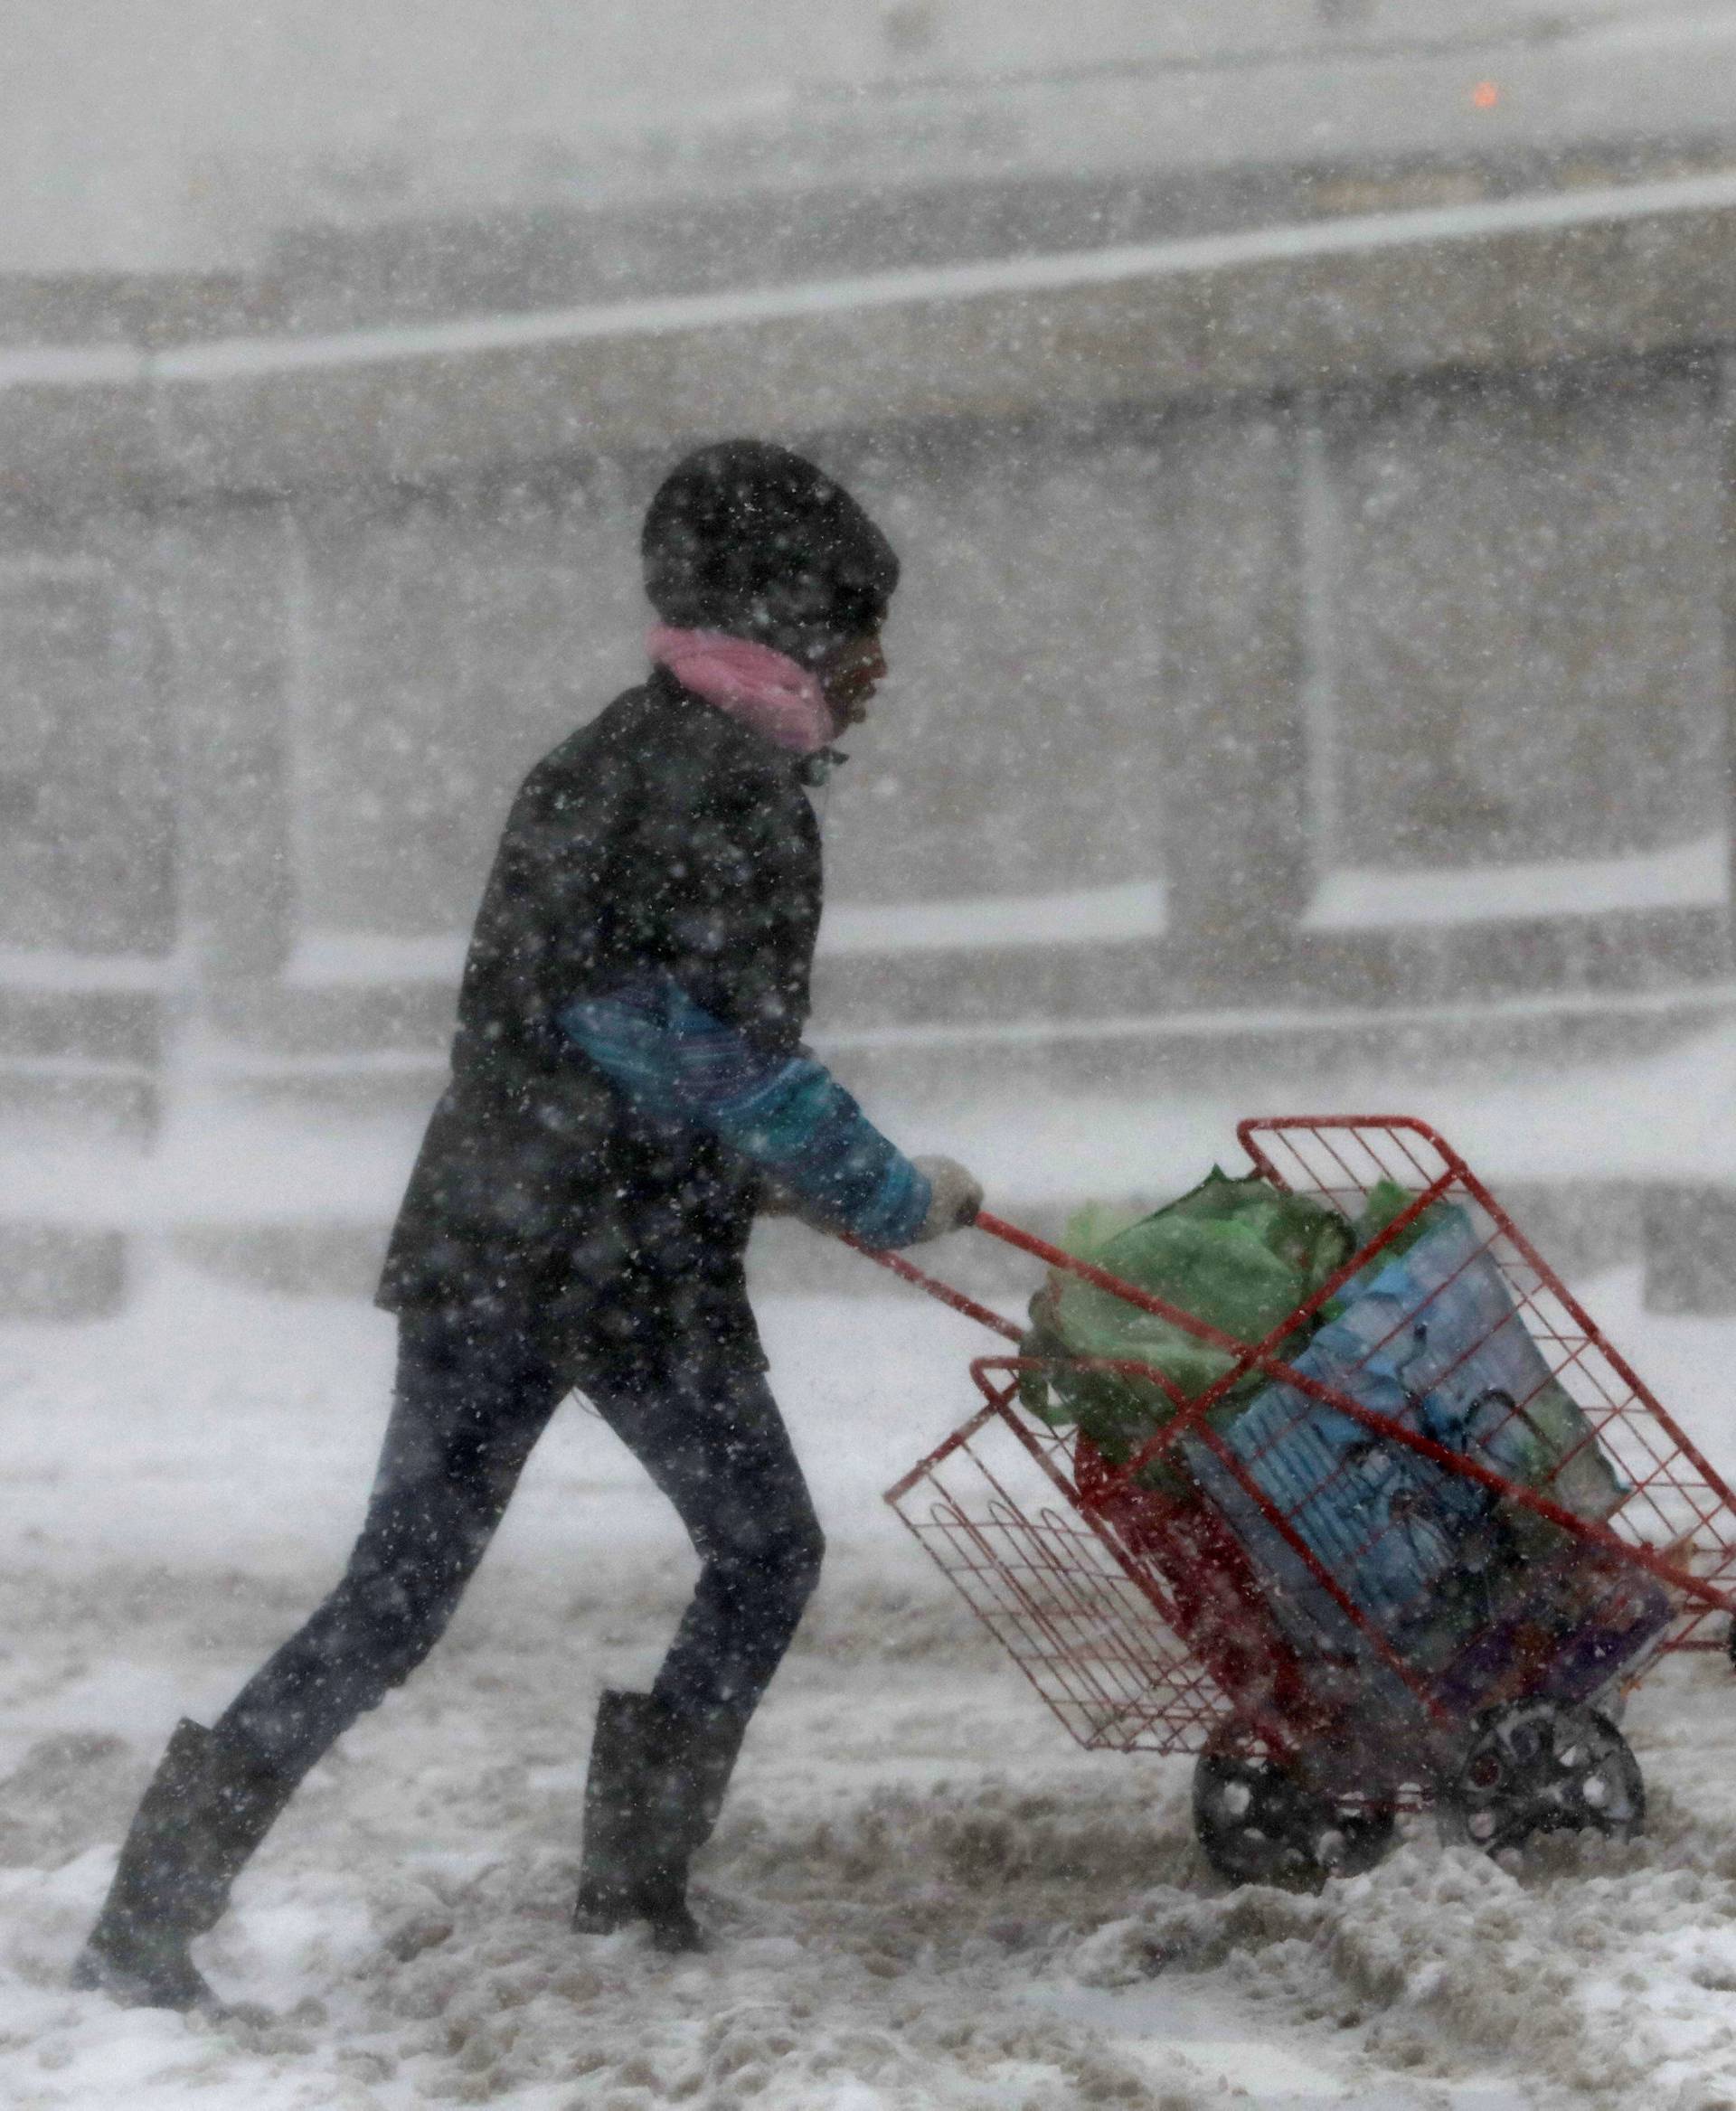 A woman struggles against wind and snow in upper Manhattan during a snowstorm in New York City